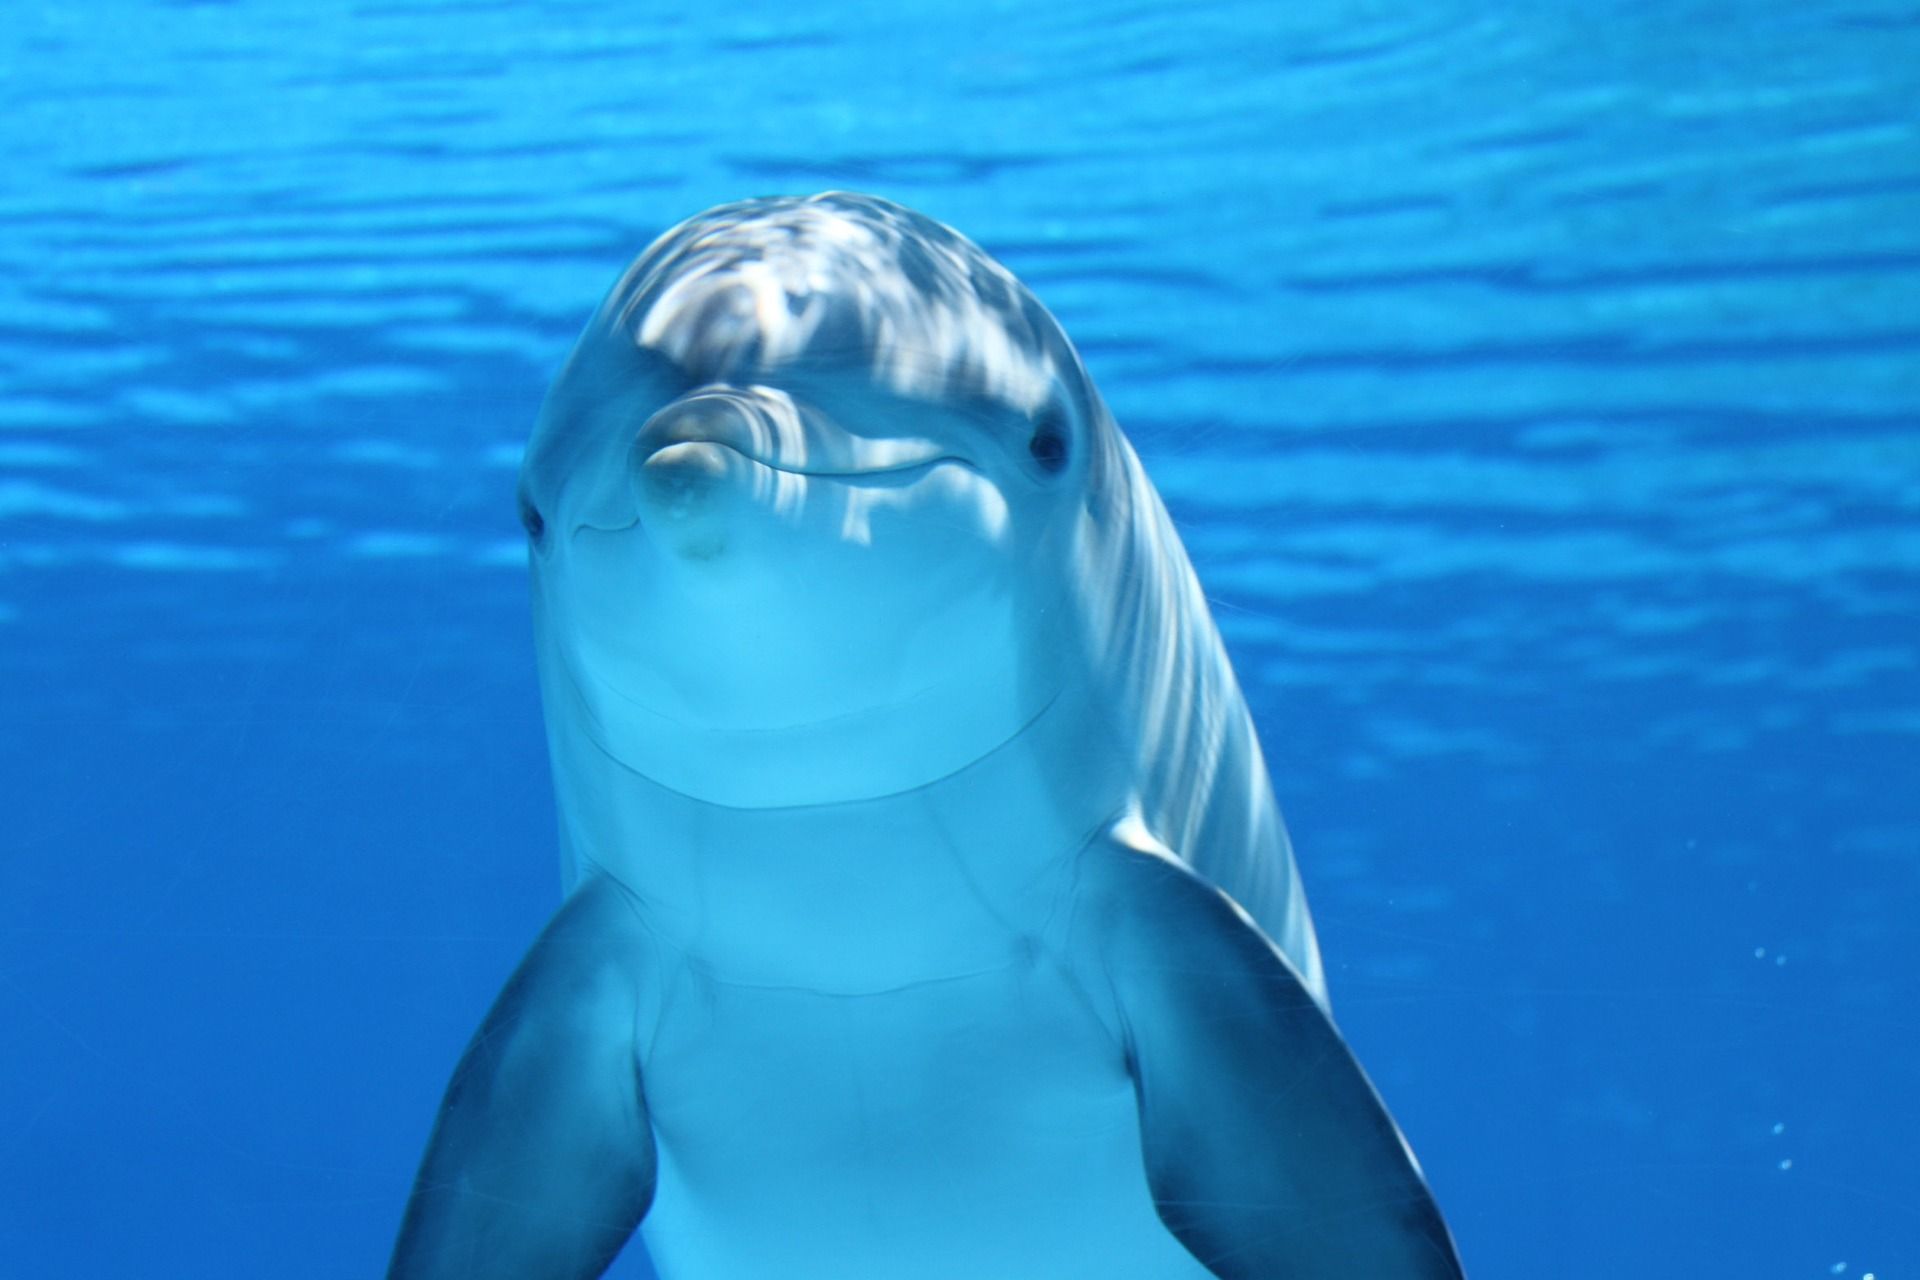 A frontal view of the head and fins of a dolphin underwater